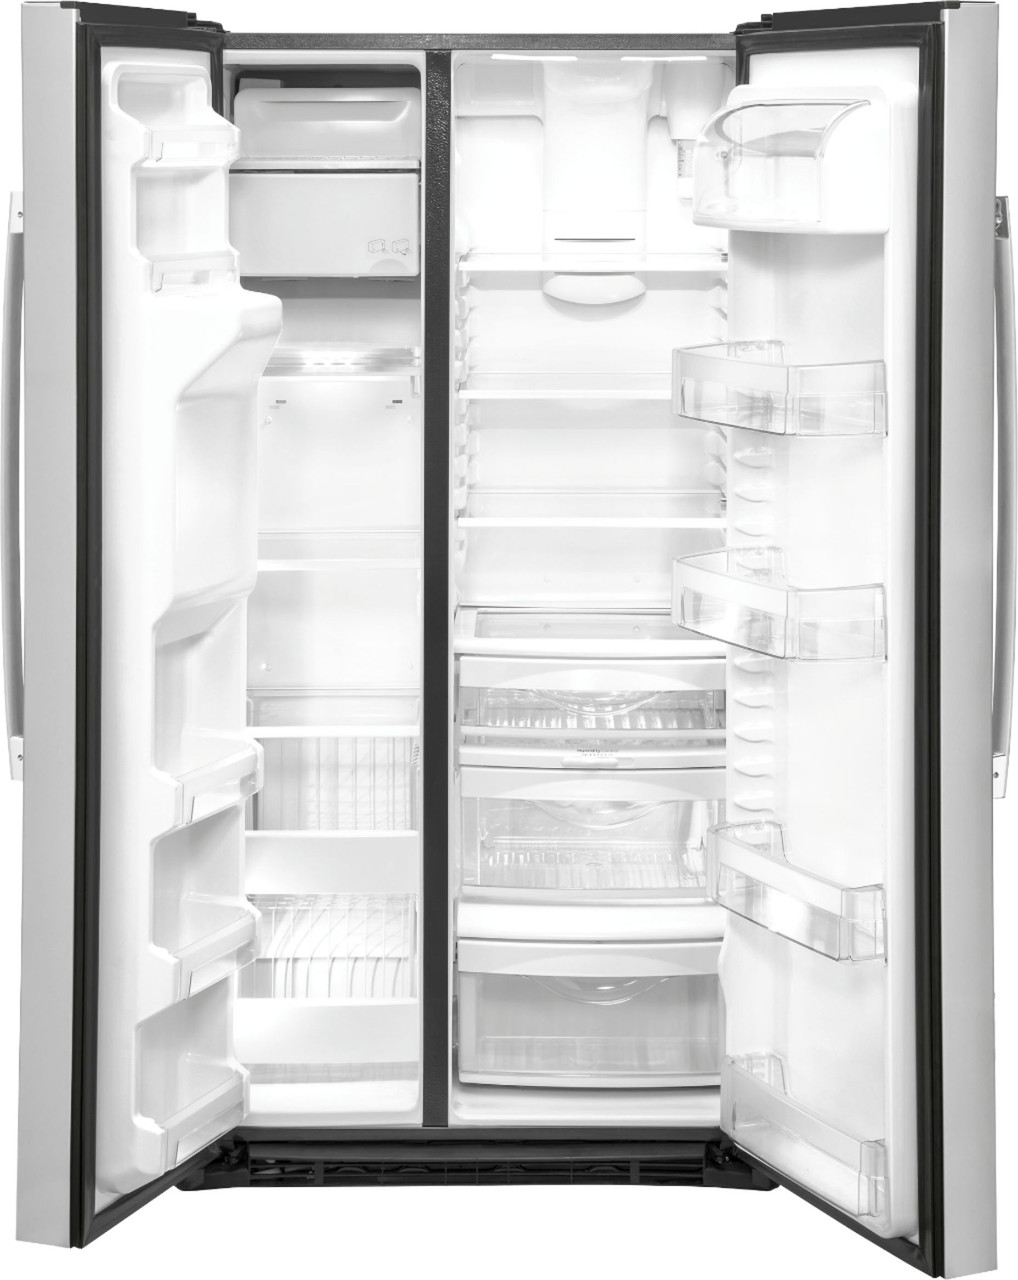 GE - 21.8 Cu. Ft. Side-by-Side Counter-Depth Refrigerator - Stainless steel